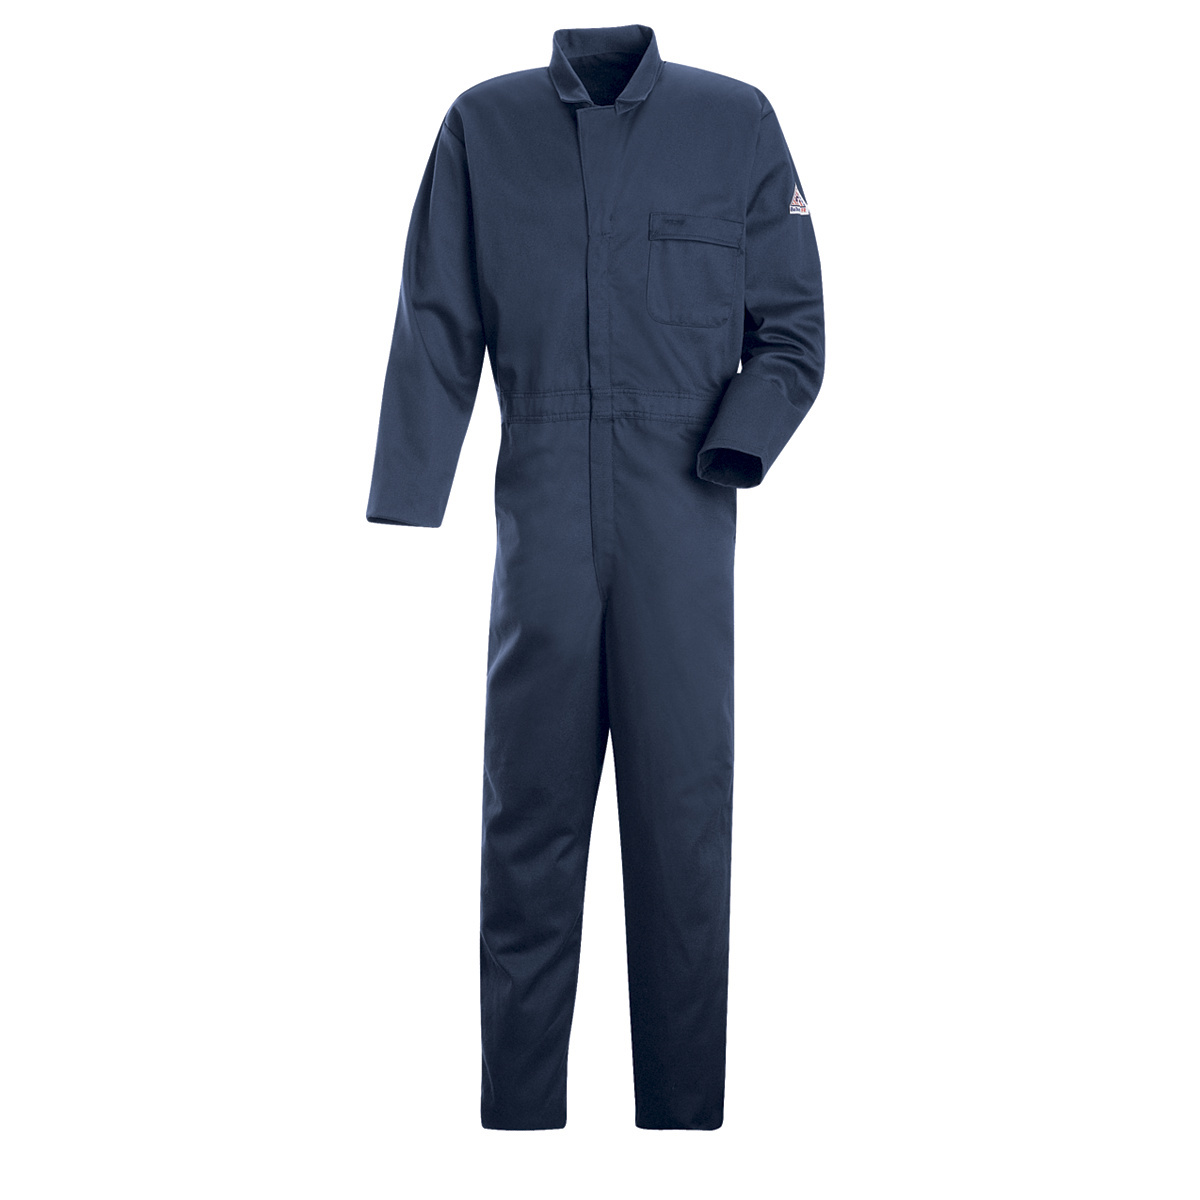 Bulwark® X-Large Tall Navy Blue EXCEL FR® Twill Cotton Flame Resistant Coveralls With Zipper Front Closure